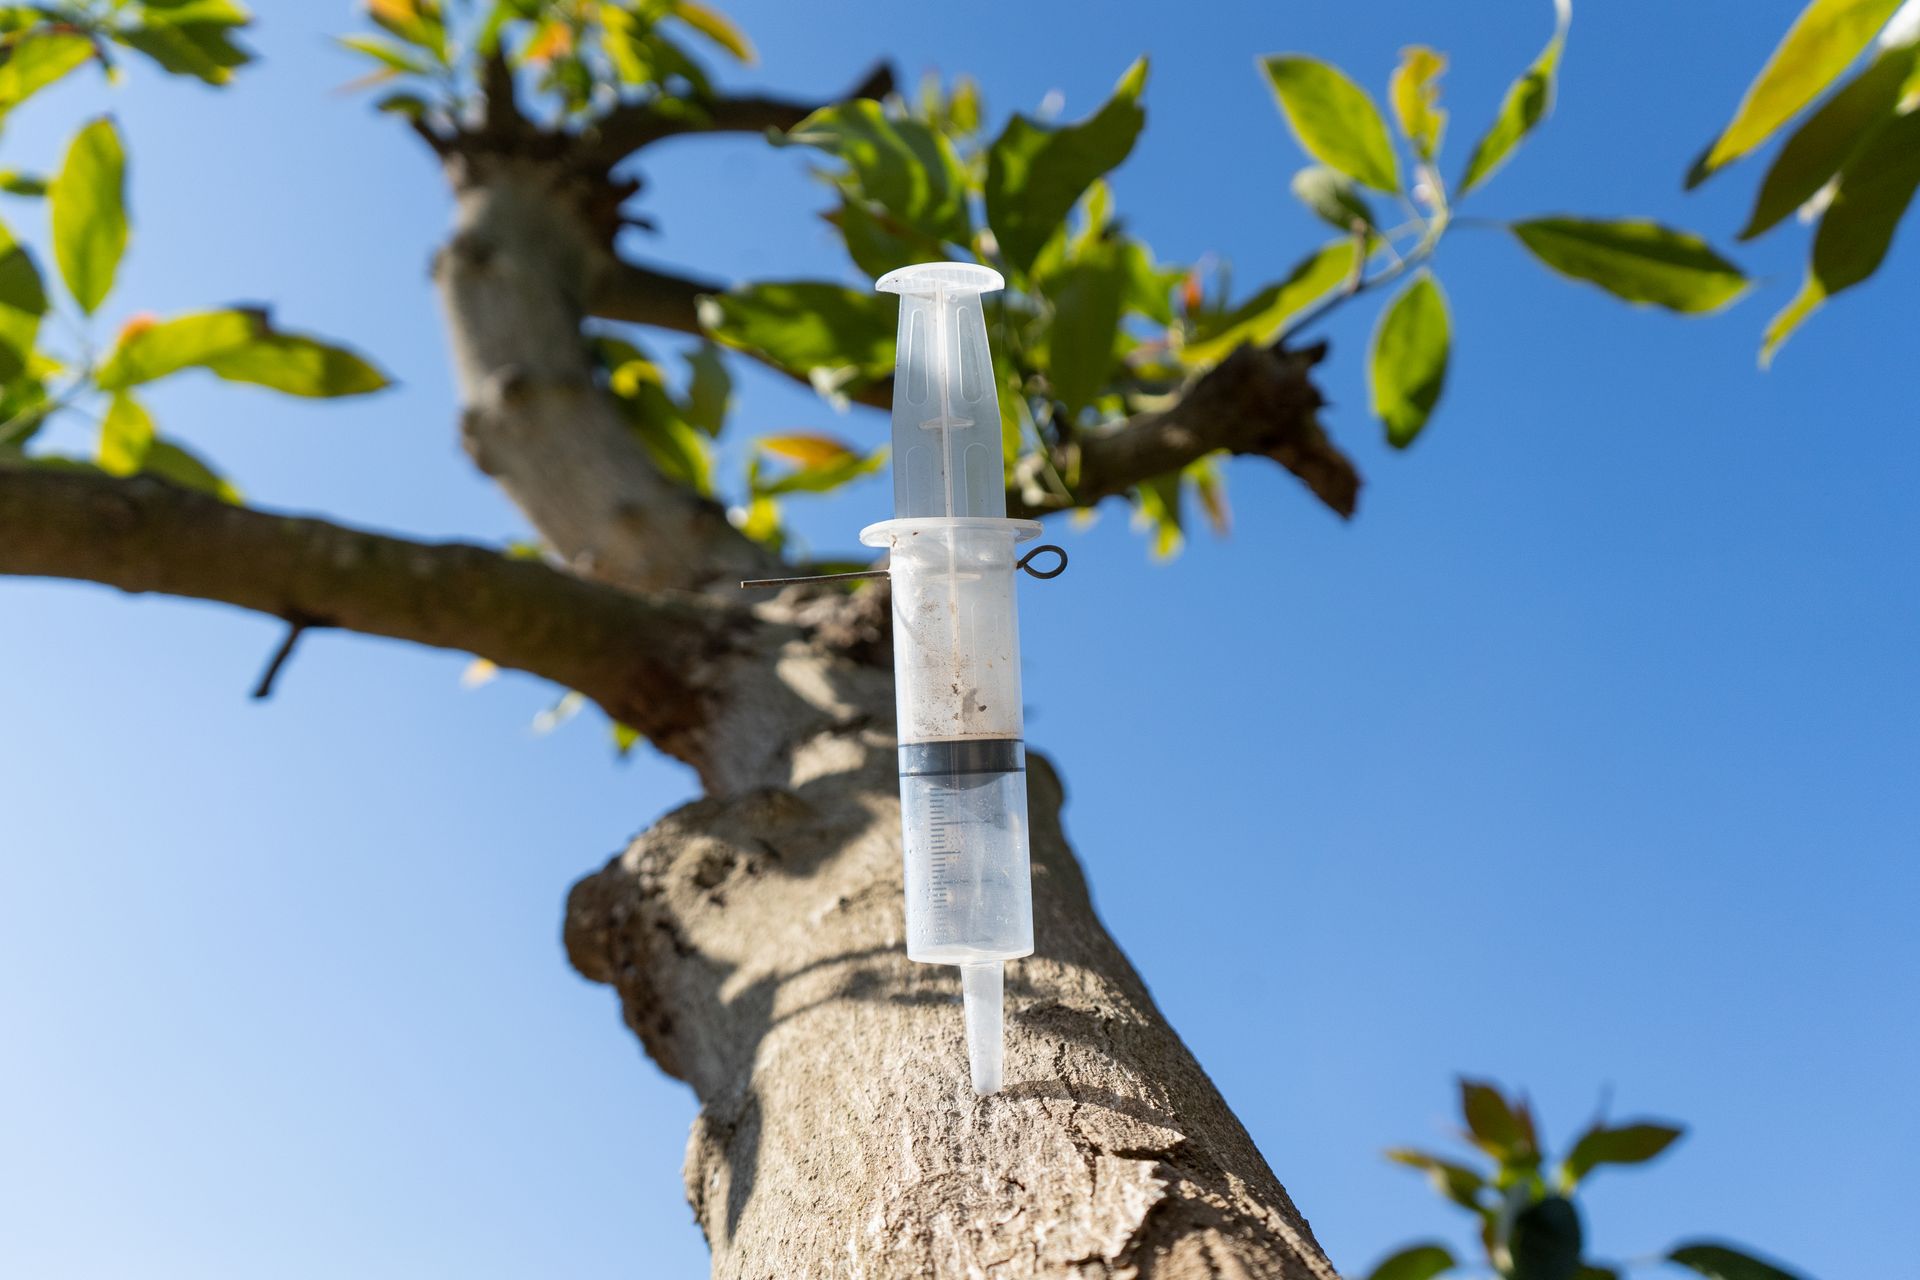 injecting treatment of a diseased tree